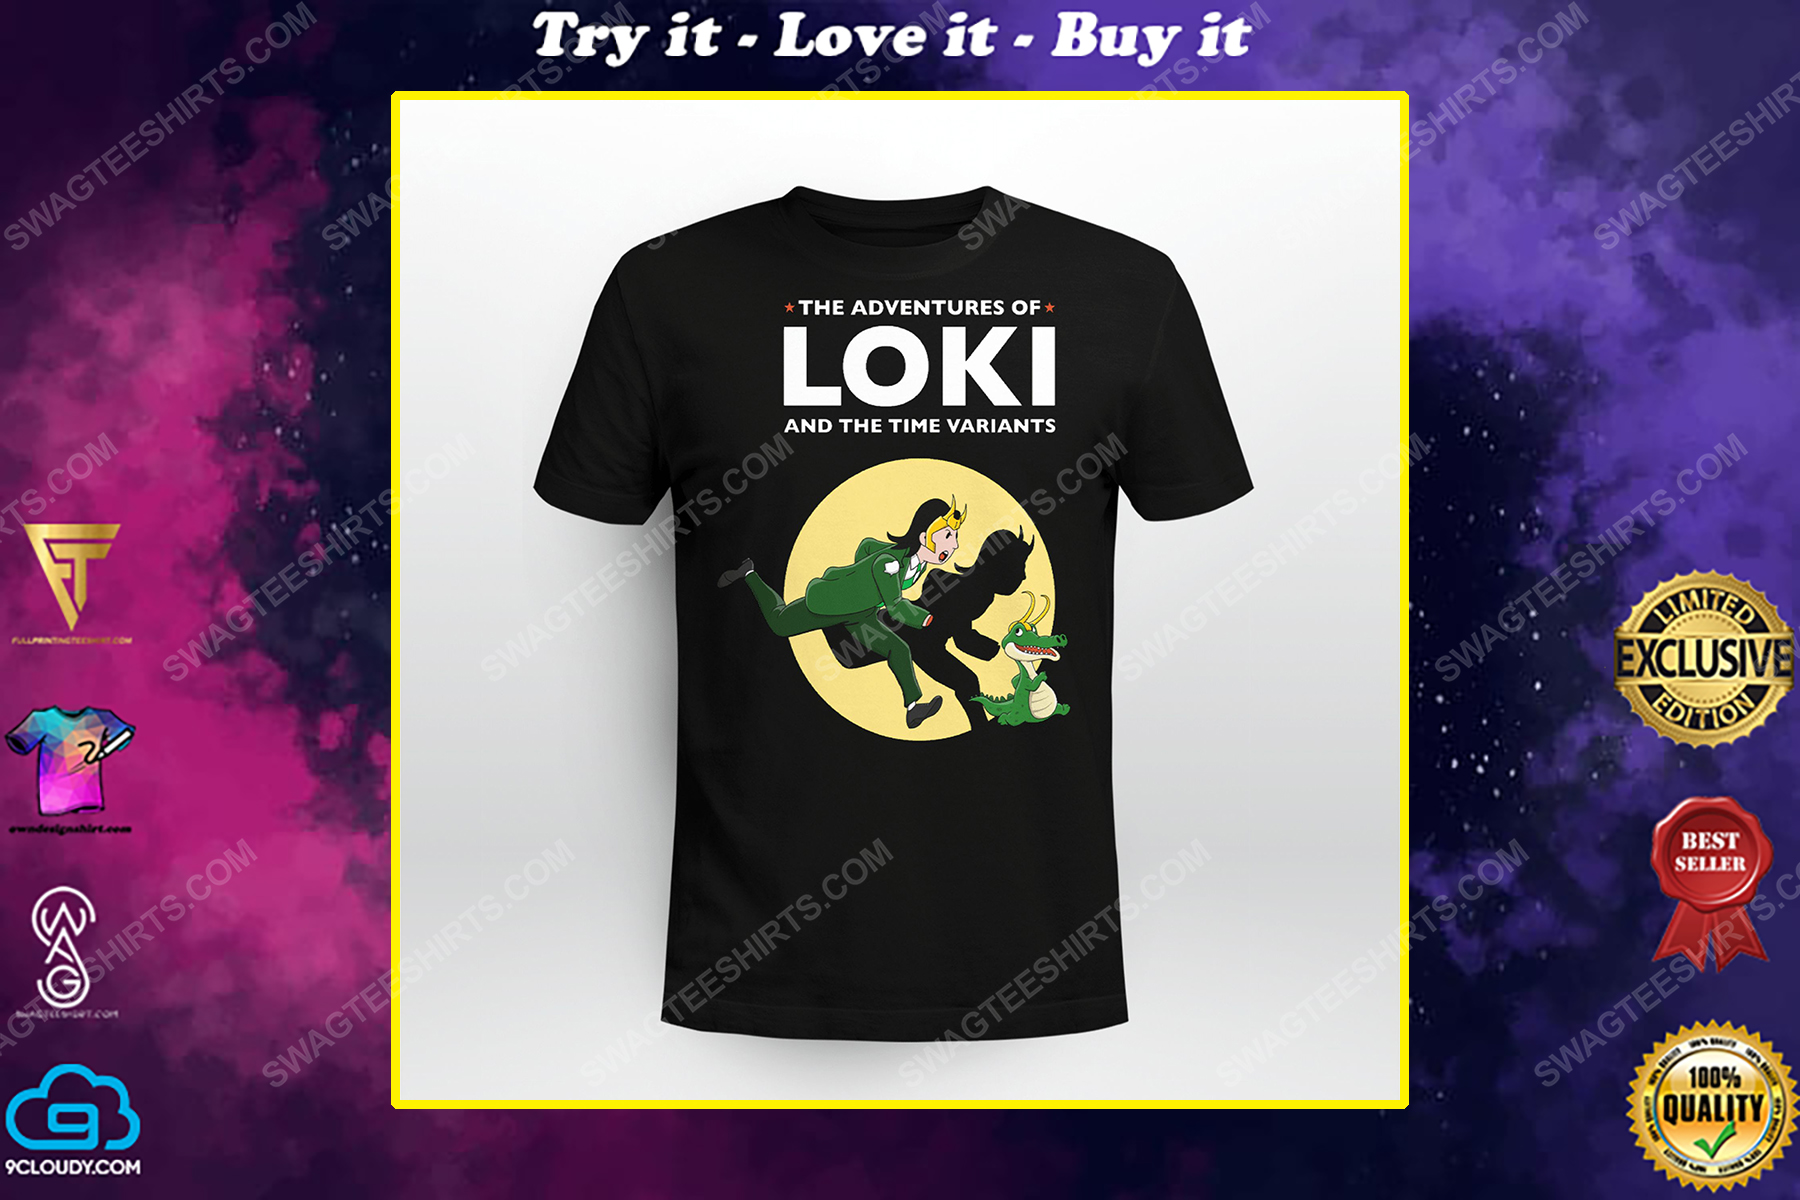 The adventures of loki and the time variants shirt